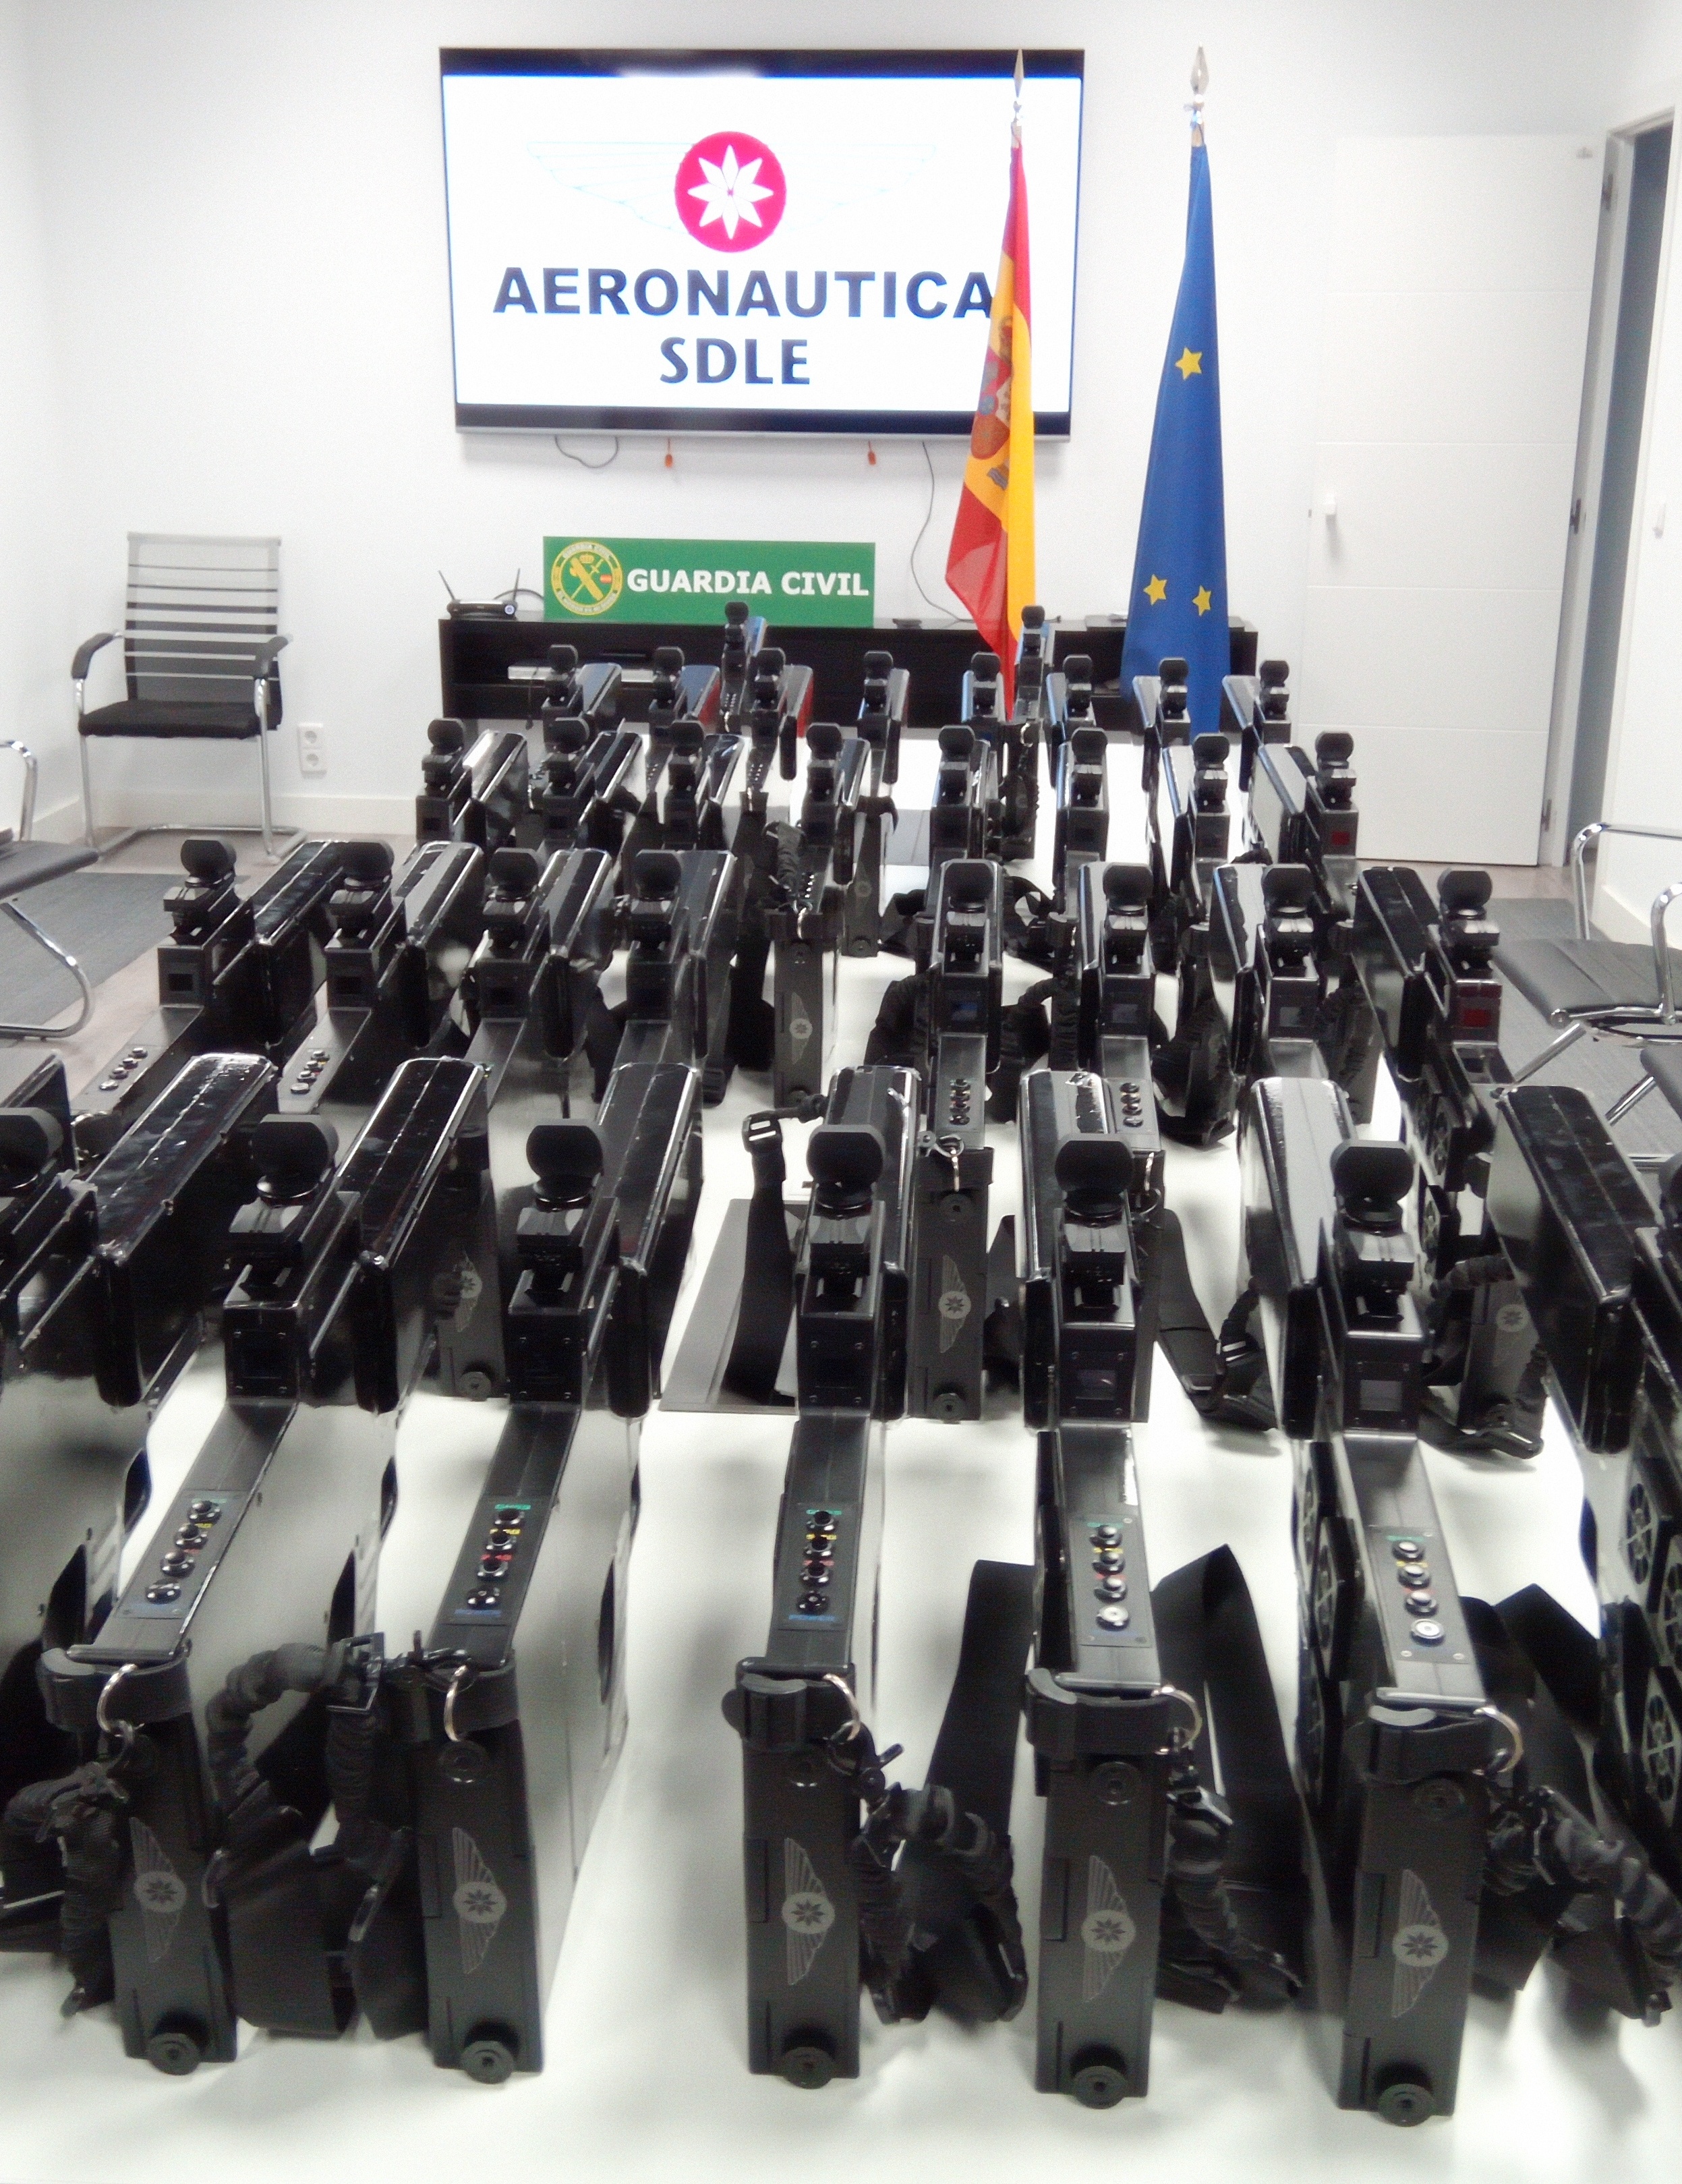 portable antidrone system used by security forces in Spain